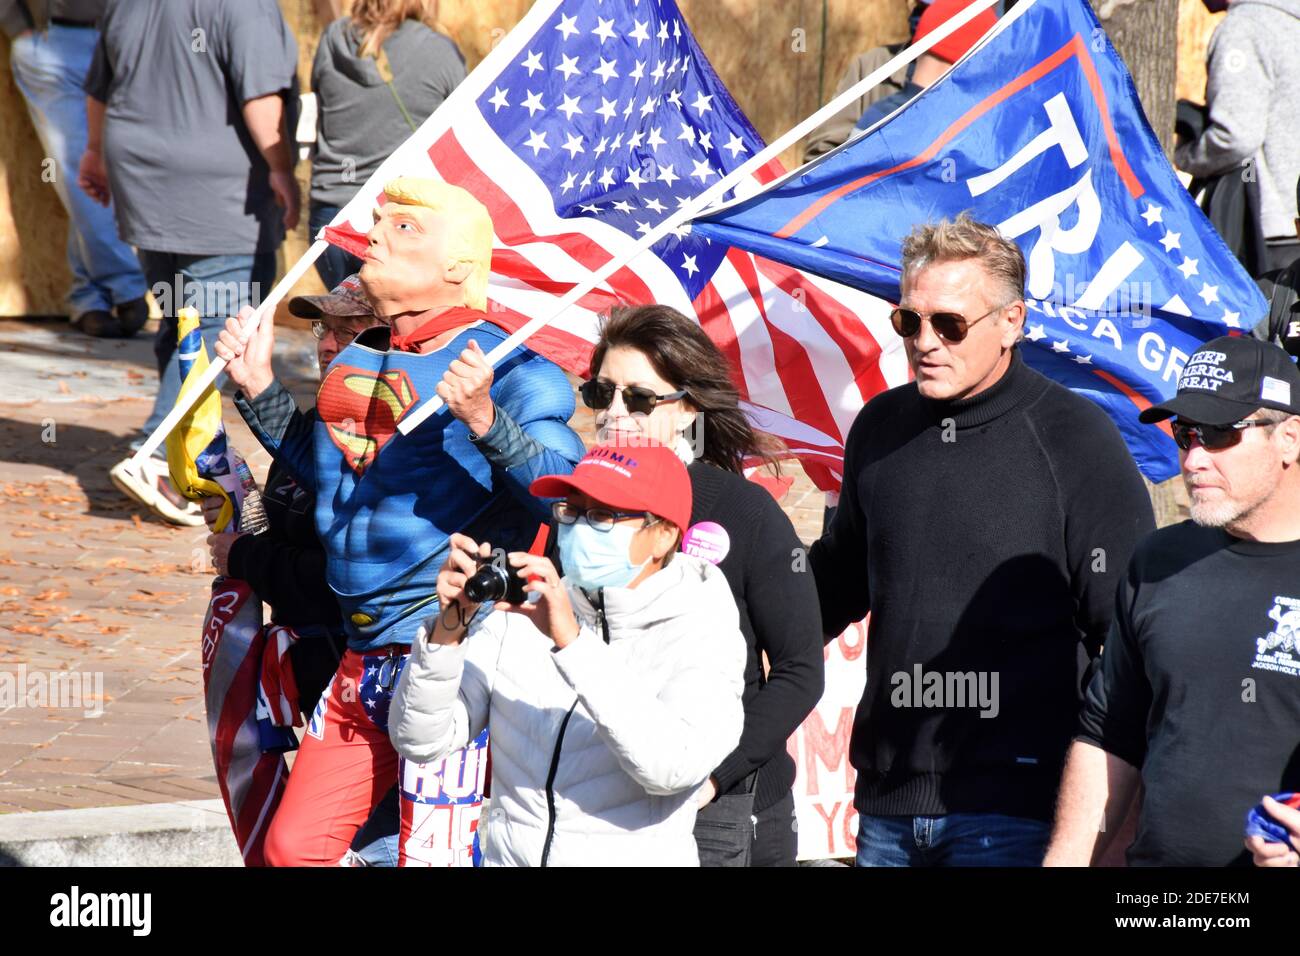 Washington DC. Nov 14, 2020. Million Maga March. A man wearing Trump superman outfit walking with American flag and Trump flag at Freedom Plaza. Stock Photo